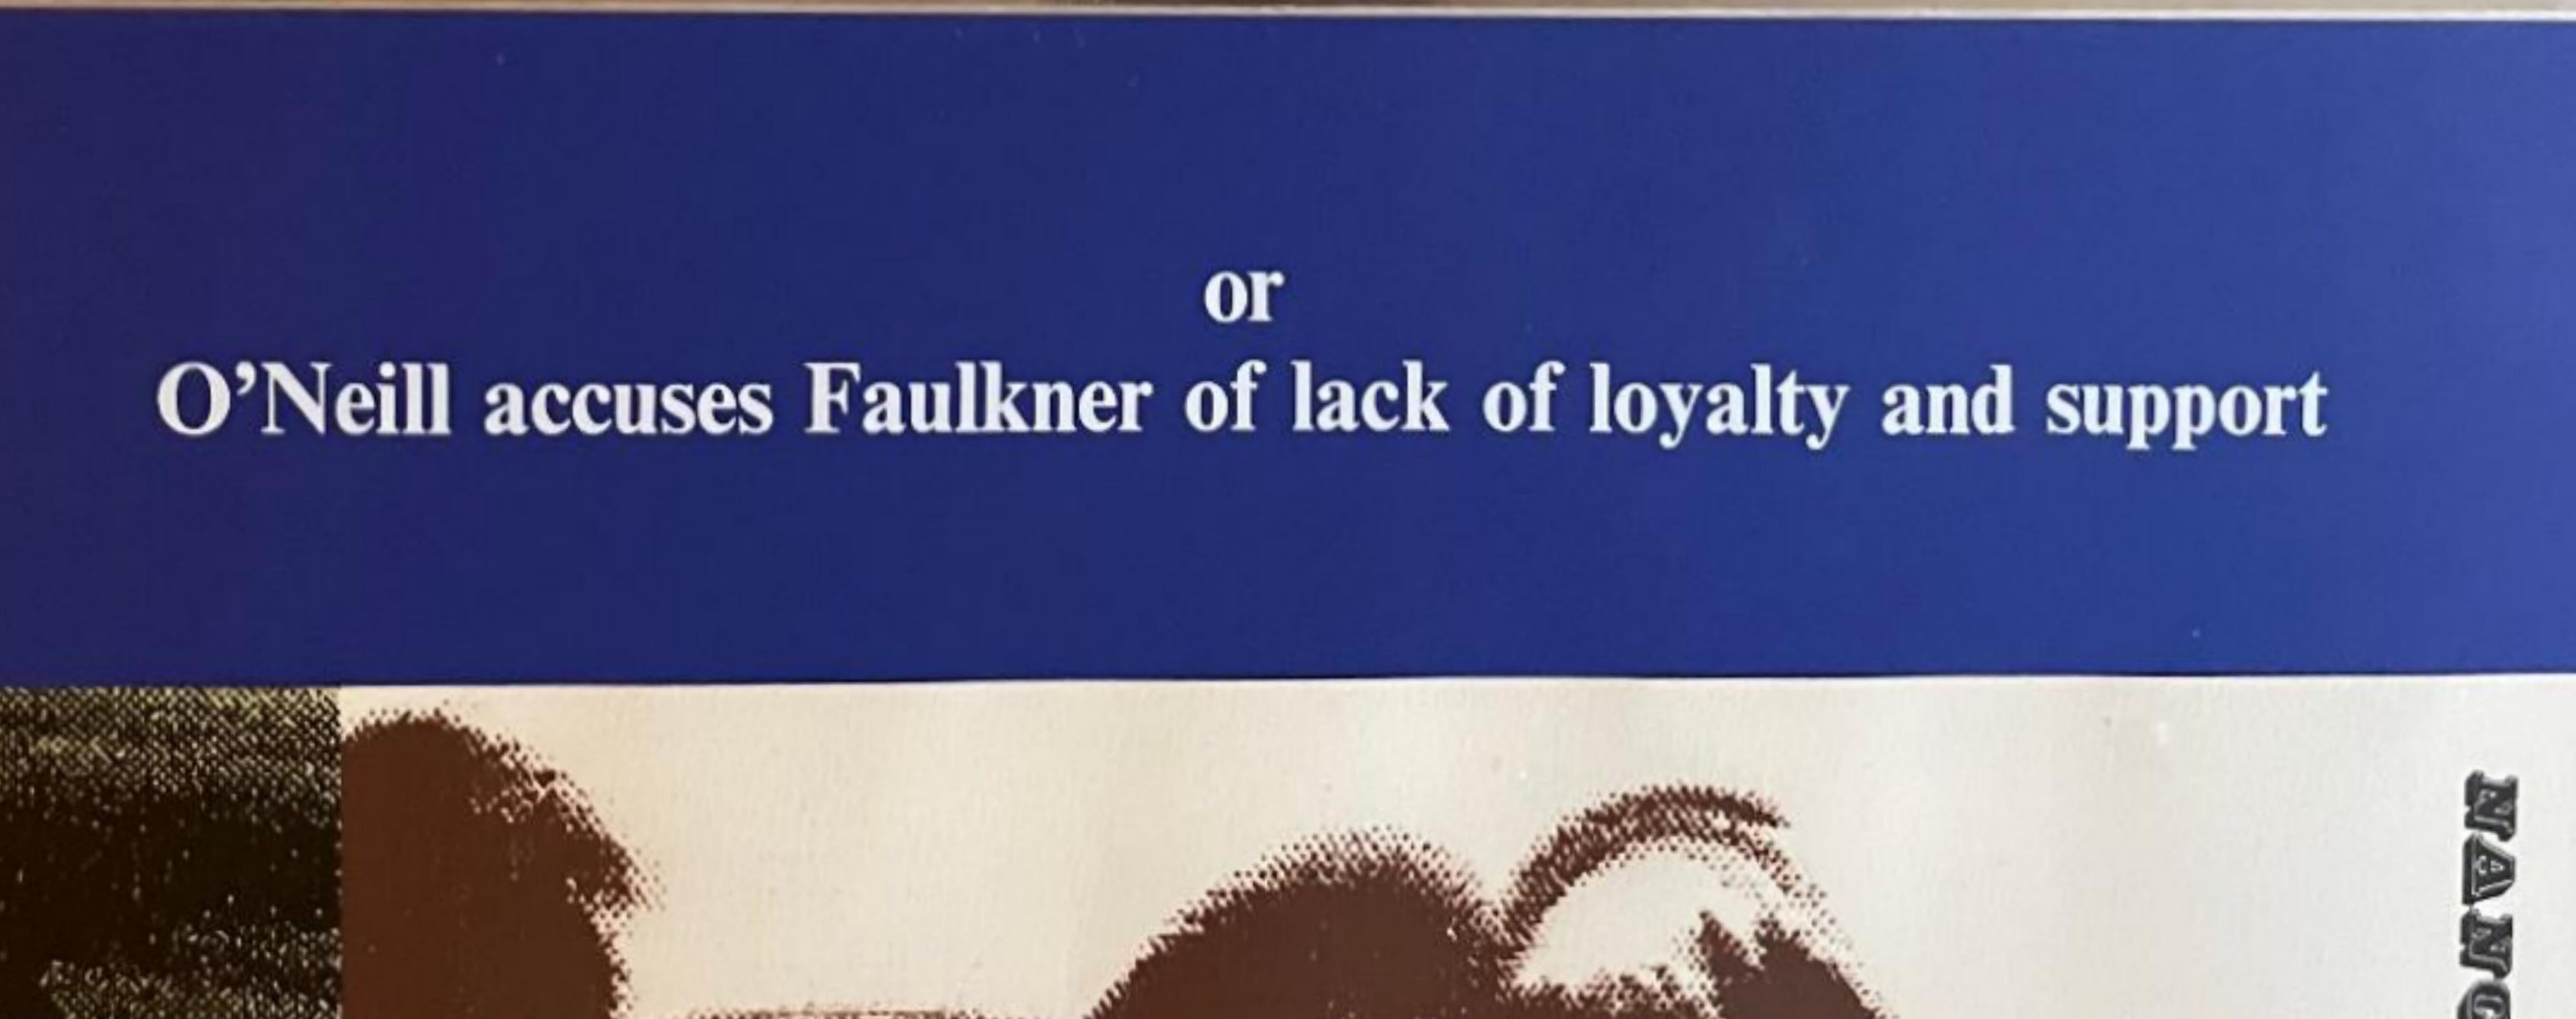 Ronald B. (R.B.) Kitaj
Nancy and Jim Dine, or O'Neill accuses Faulkner of lack of loyalty and support (Kinsman 40), 1970
16 Color Silkscreen with collage and coating on different wove papers
Hand signed and numbered in pencil 29/70 on the front. The